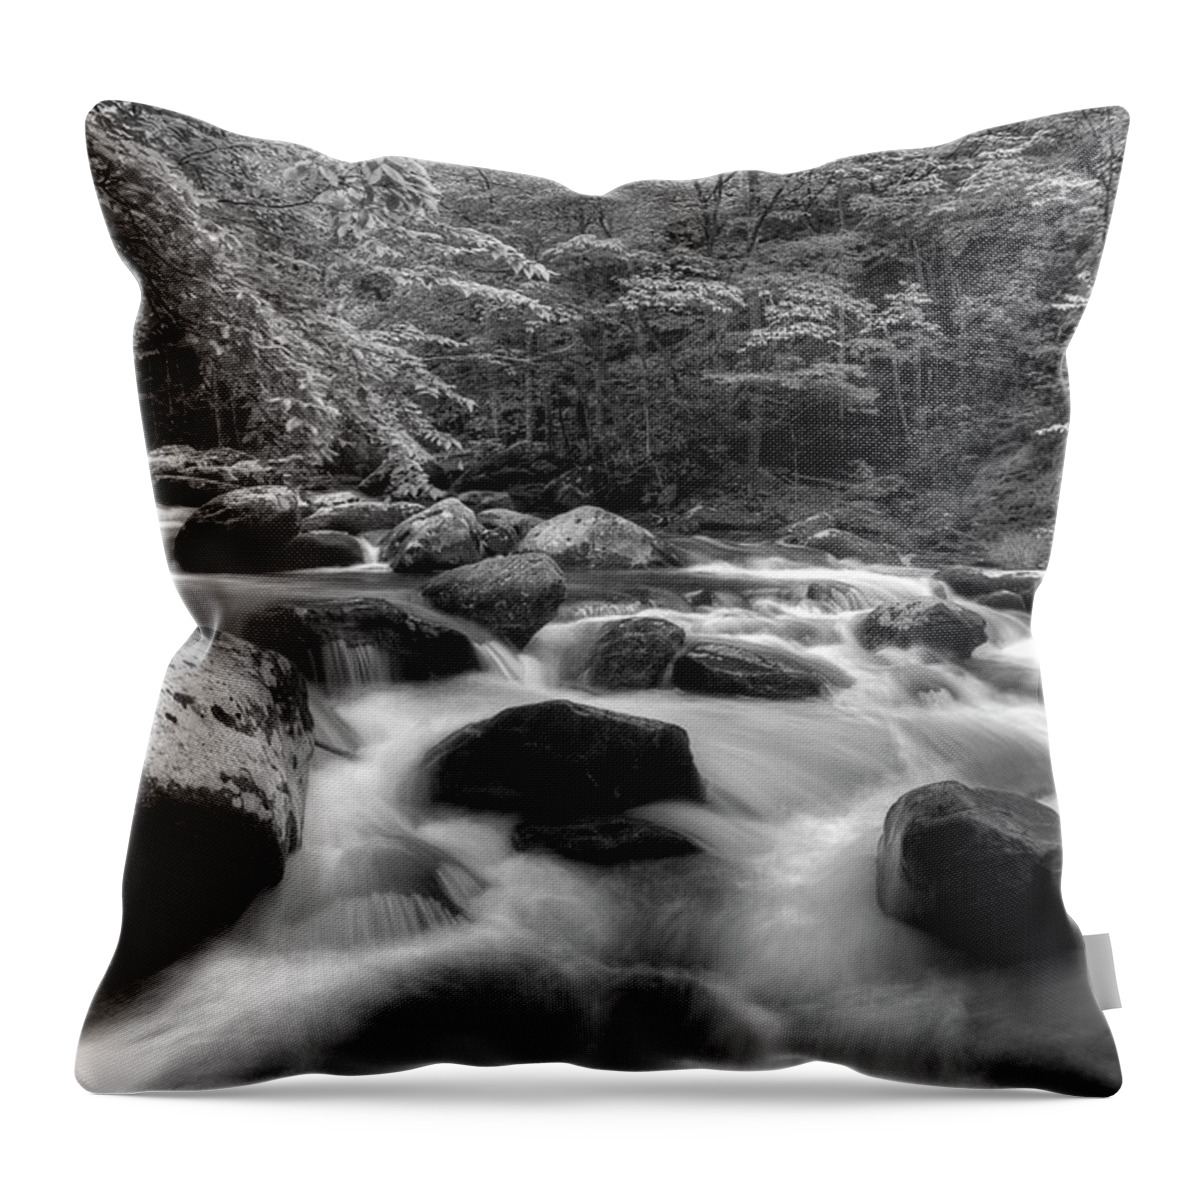 Monochrome River Scene Throw Pillow featuring the photograph A Black And White River by Mike Eingle